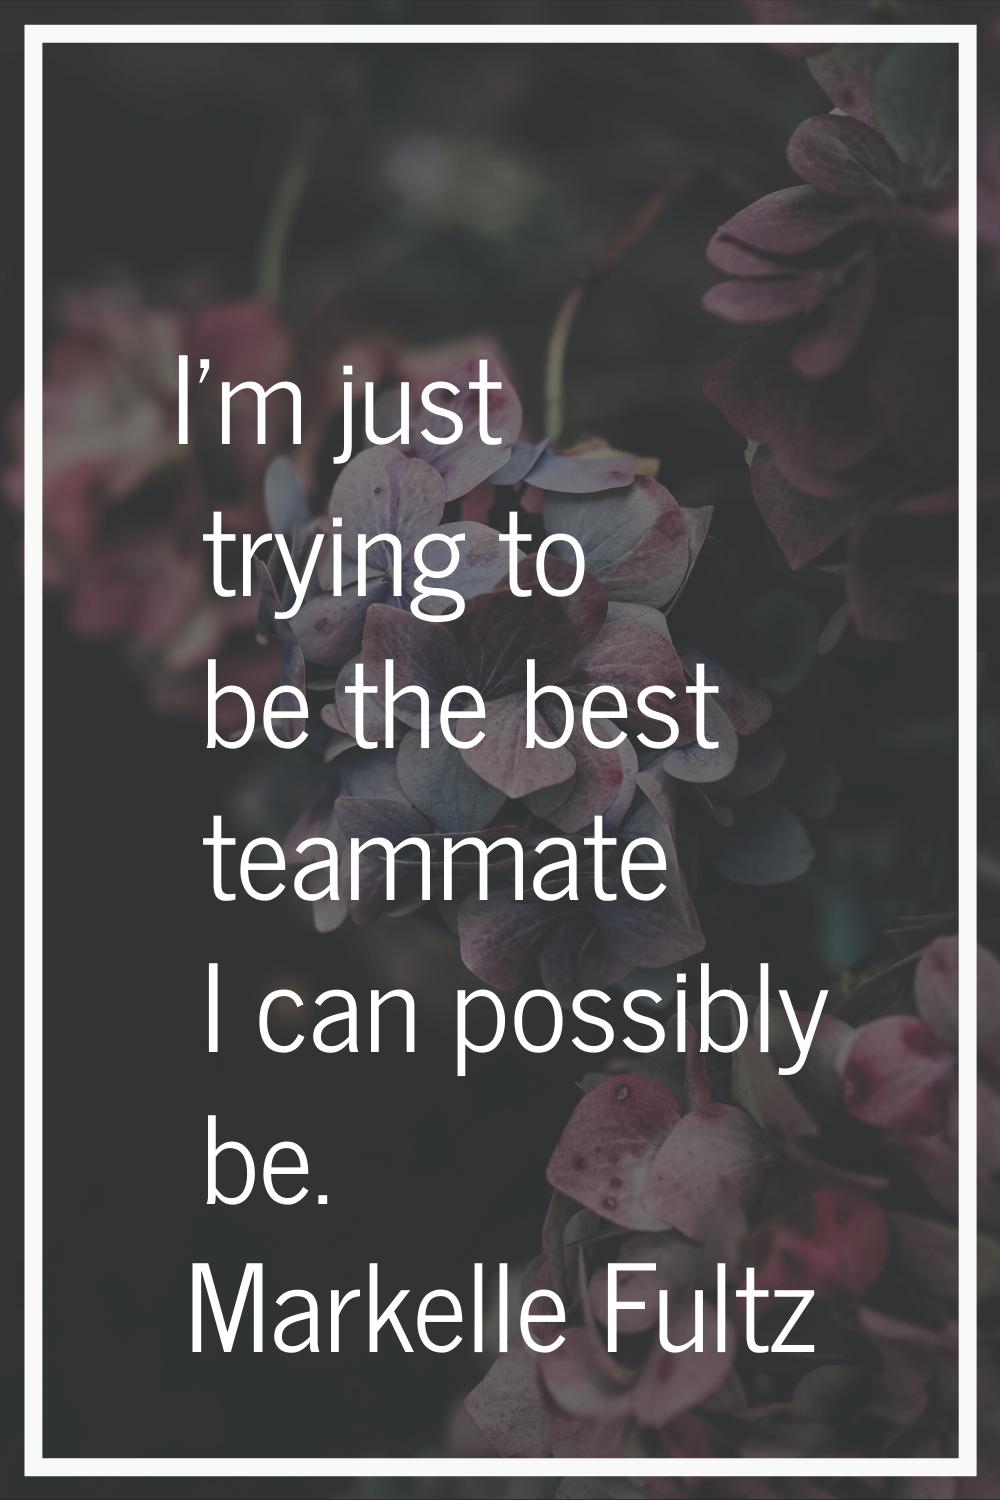 I'm just trying to be the best teammate I can possibly be.